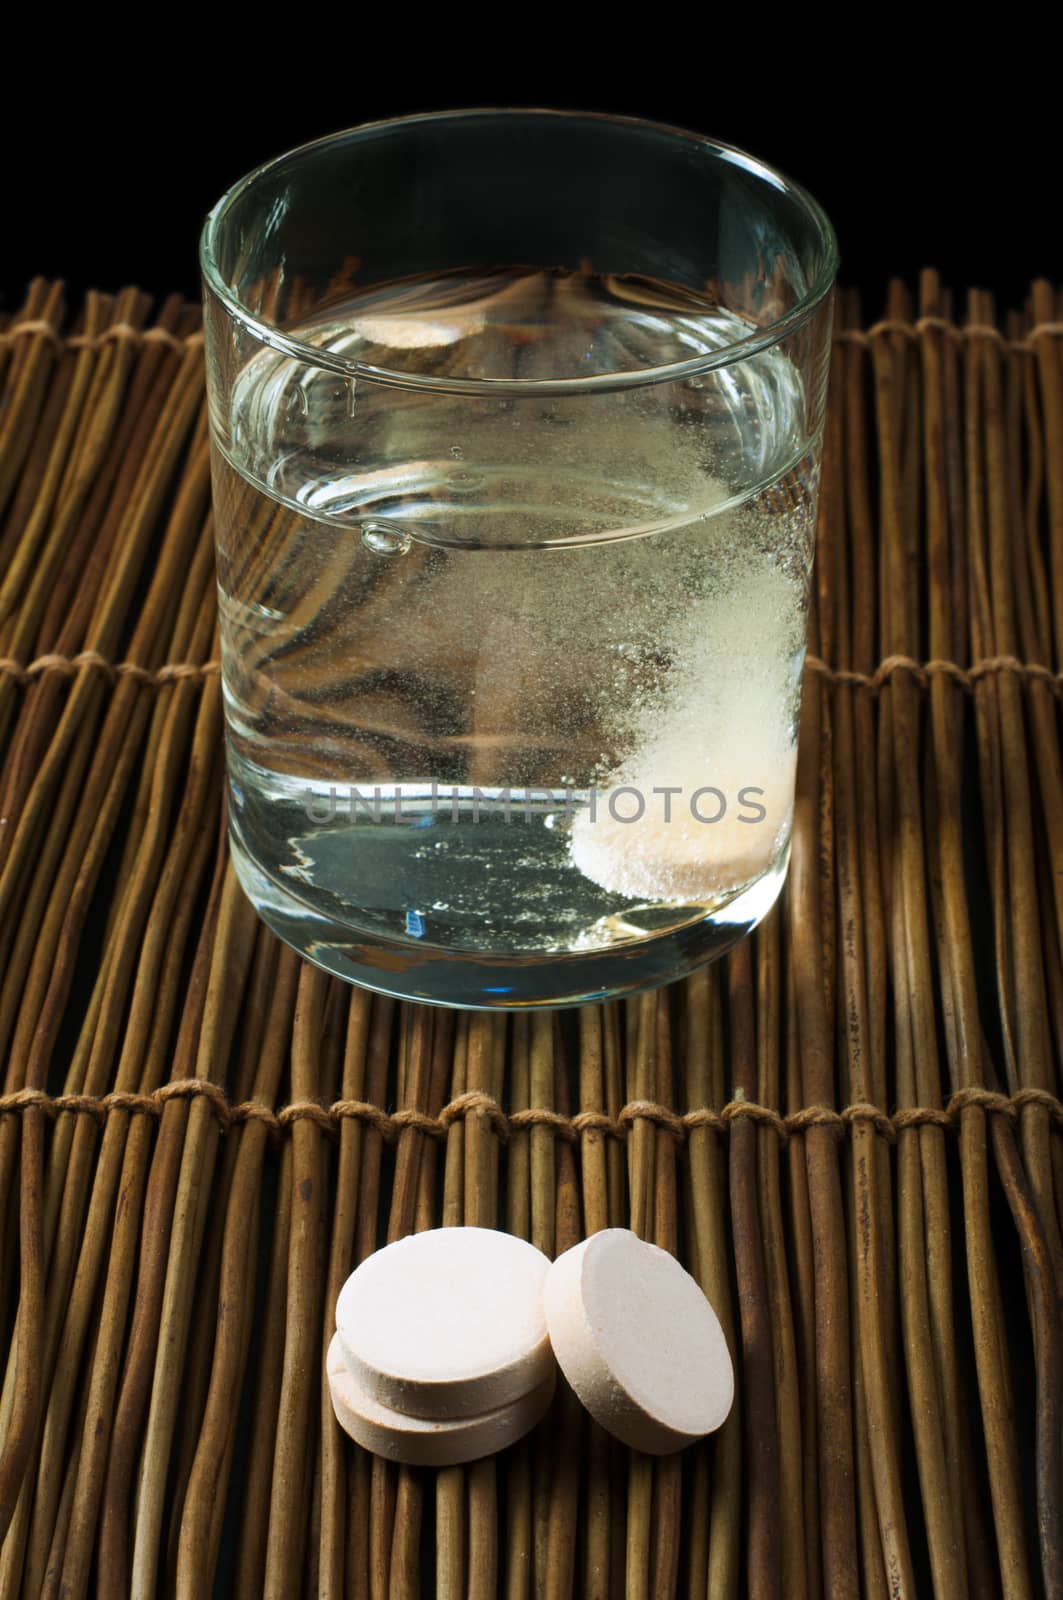 Water soluble aspirin. Glass of water and pills.